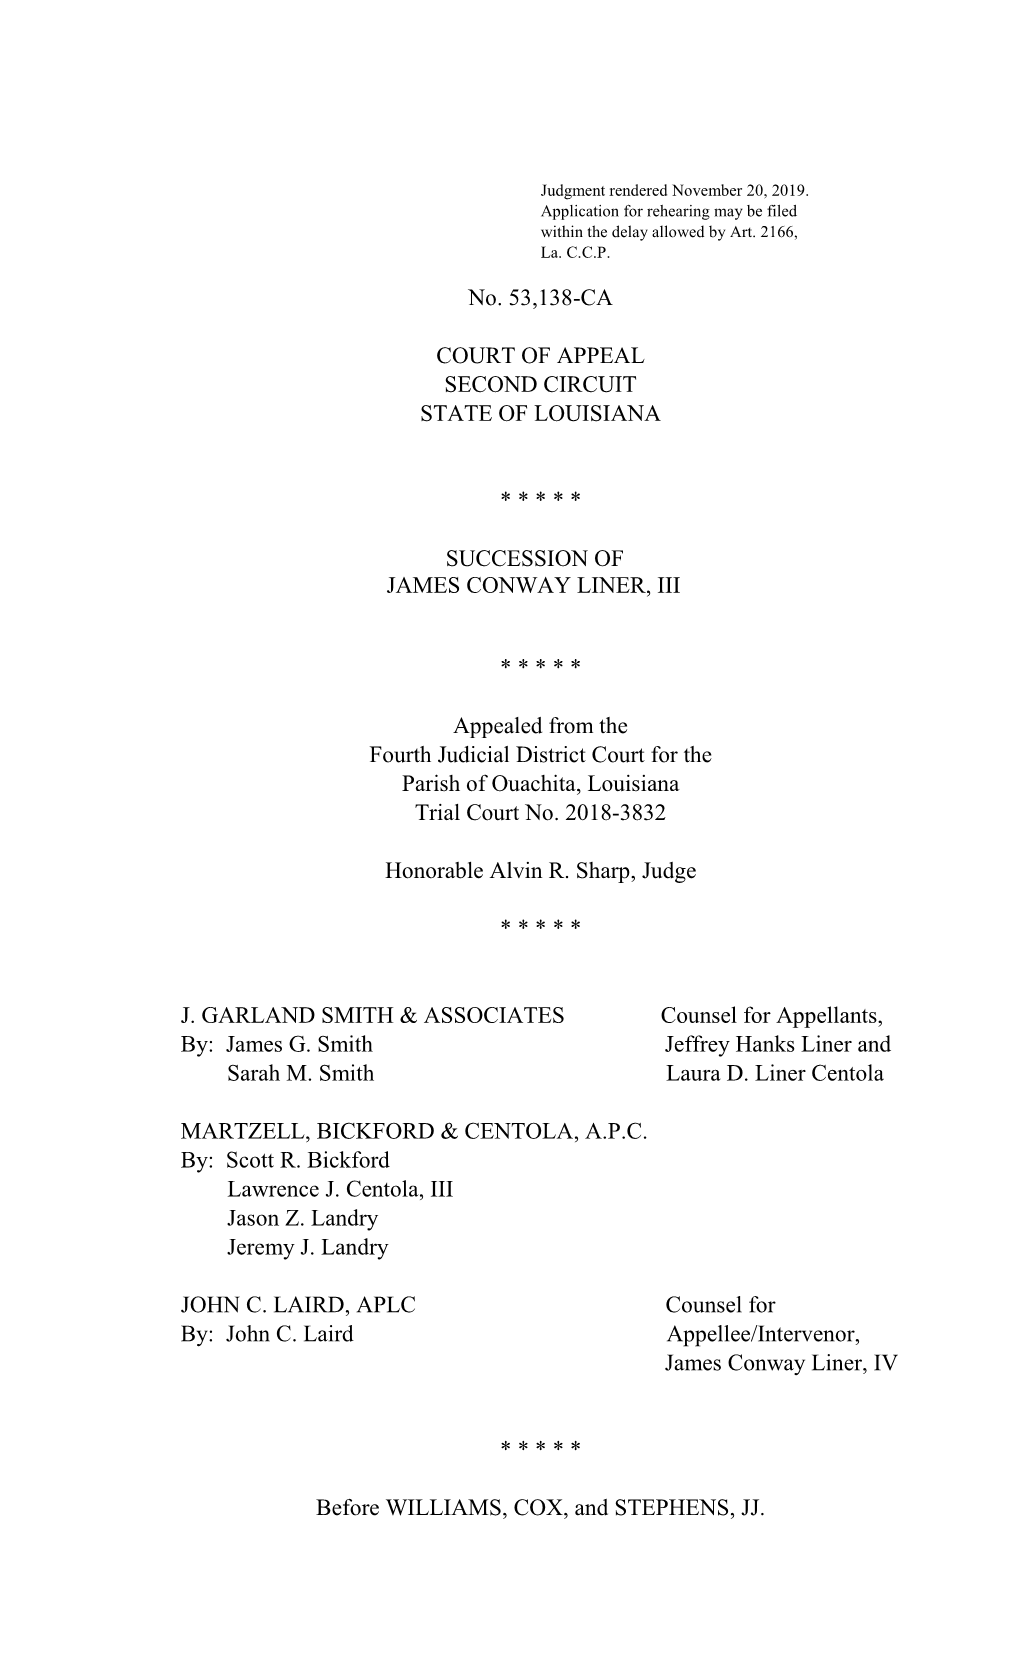 No. 53,138-CA COURT of APPEAL SECOND CIRCUIT STATE OF